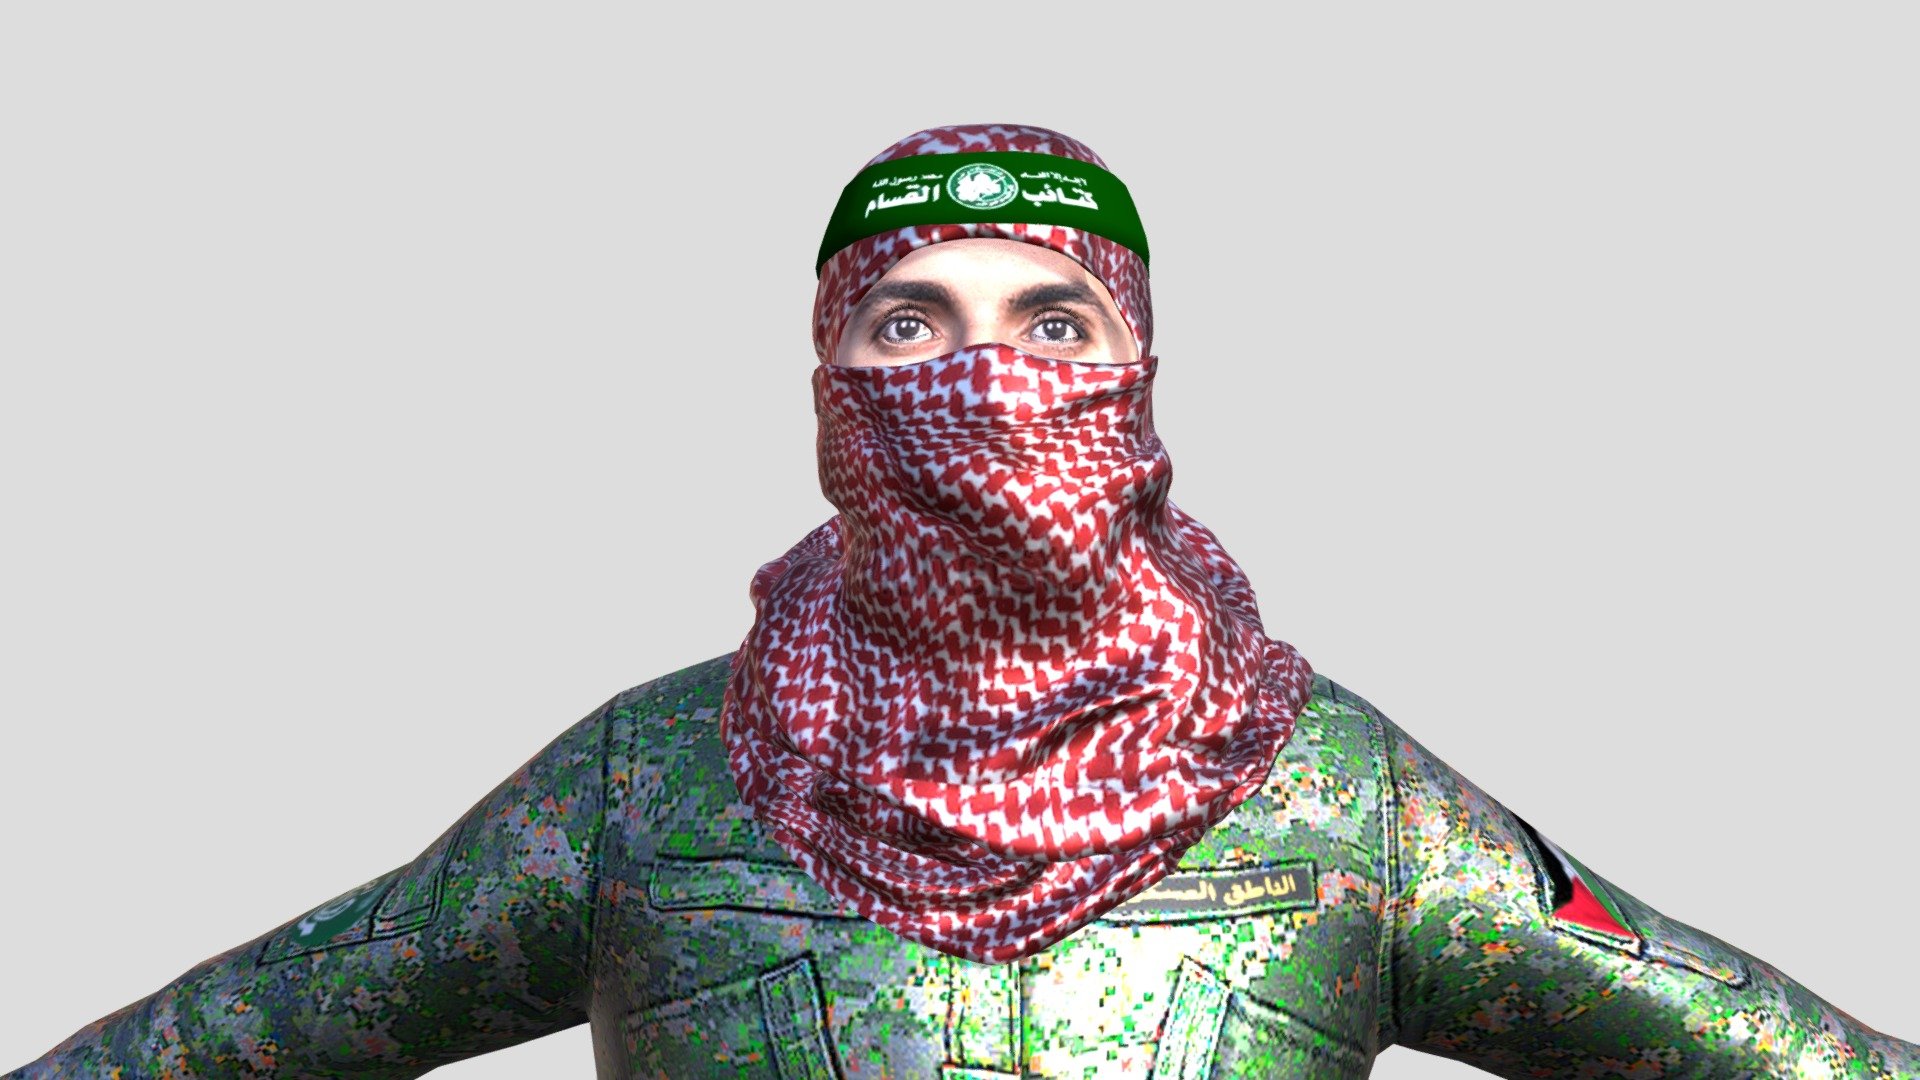 Long Live HAMAS and Free Palestine :D
Low poly character for game and animation video. Rig bone in T Pose with Mixamo and ready to change pose. Texture its Image and UV, the model format file available FBX, OBJ, GLB  and Blender.
Information Statistic :
Object : 1/2
Vertices : 61, 472
Edges : 129, 211
Face : 68, 461
Triangles : 113, 165
For detail : https://www.youtube.com/shorts/rZlZeW161n8
Gallery detail : https://www.artstation.com/artwork/6N1366 - ABU OBAIDA HAMAS - Buy Royalty Free 3D model by zukiersoliter 3d model